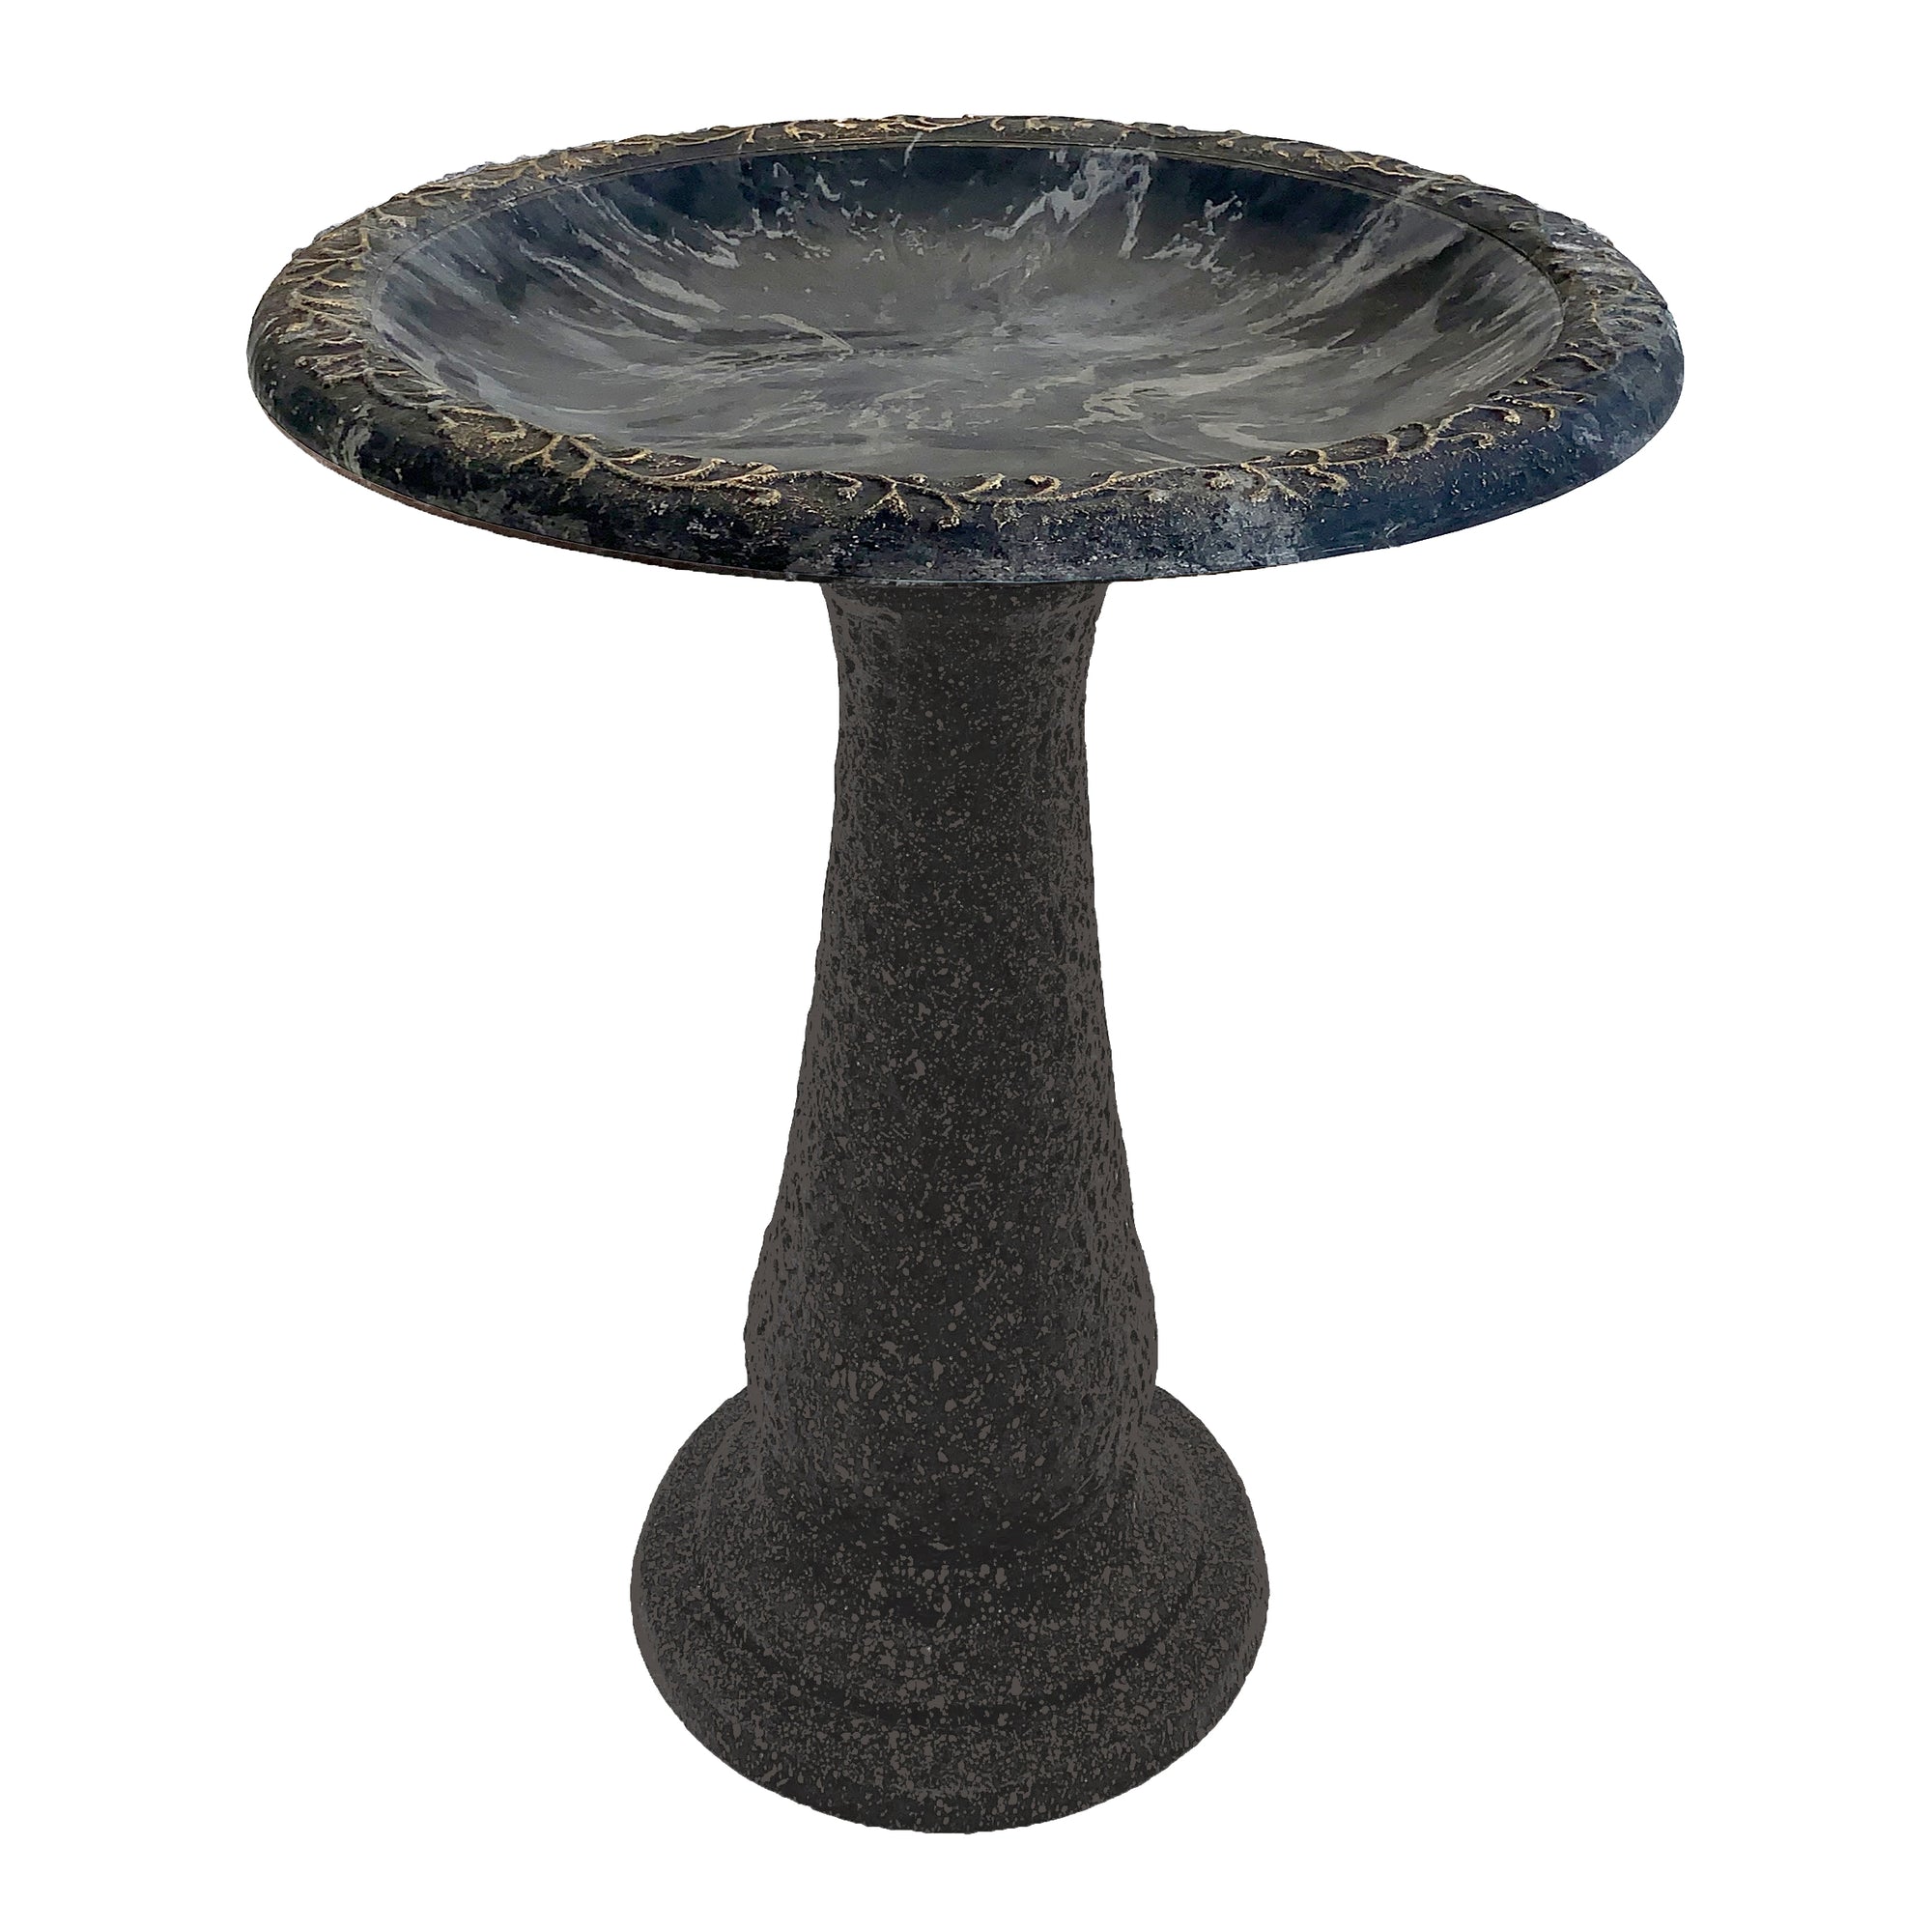 Charcoal Sand Fiber Clay Birdbath. Made of 70% clay, 25% plastic, and 5% fiber. Impact and shatter-resistant. UV protection. 19"D x 24"H 21"H base, 8 lbs.